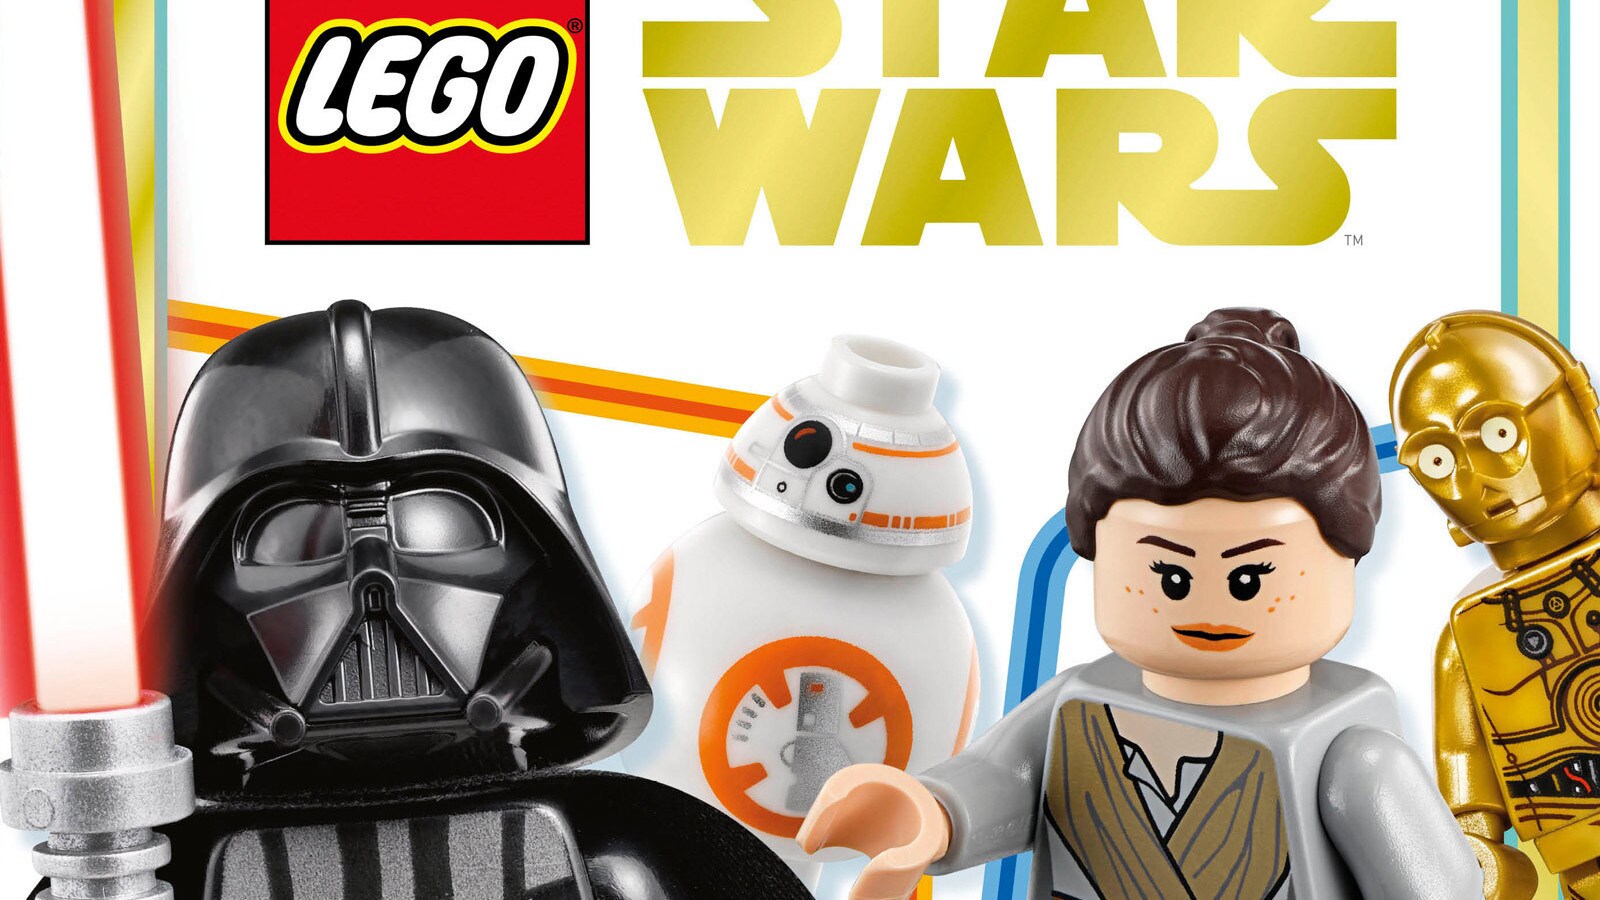 New Galaxy Guides: Get a First Look at DK's Star Wars Visual Encyclopedia and The Amazing Book of LEGO Star Wars